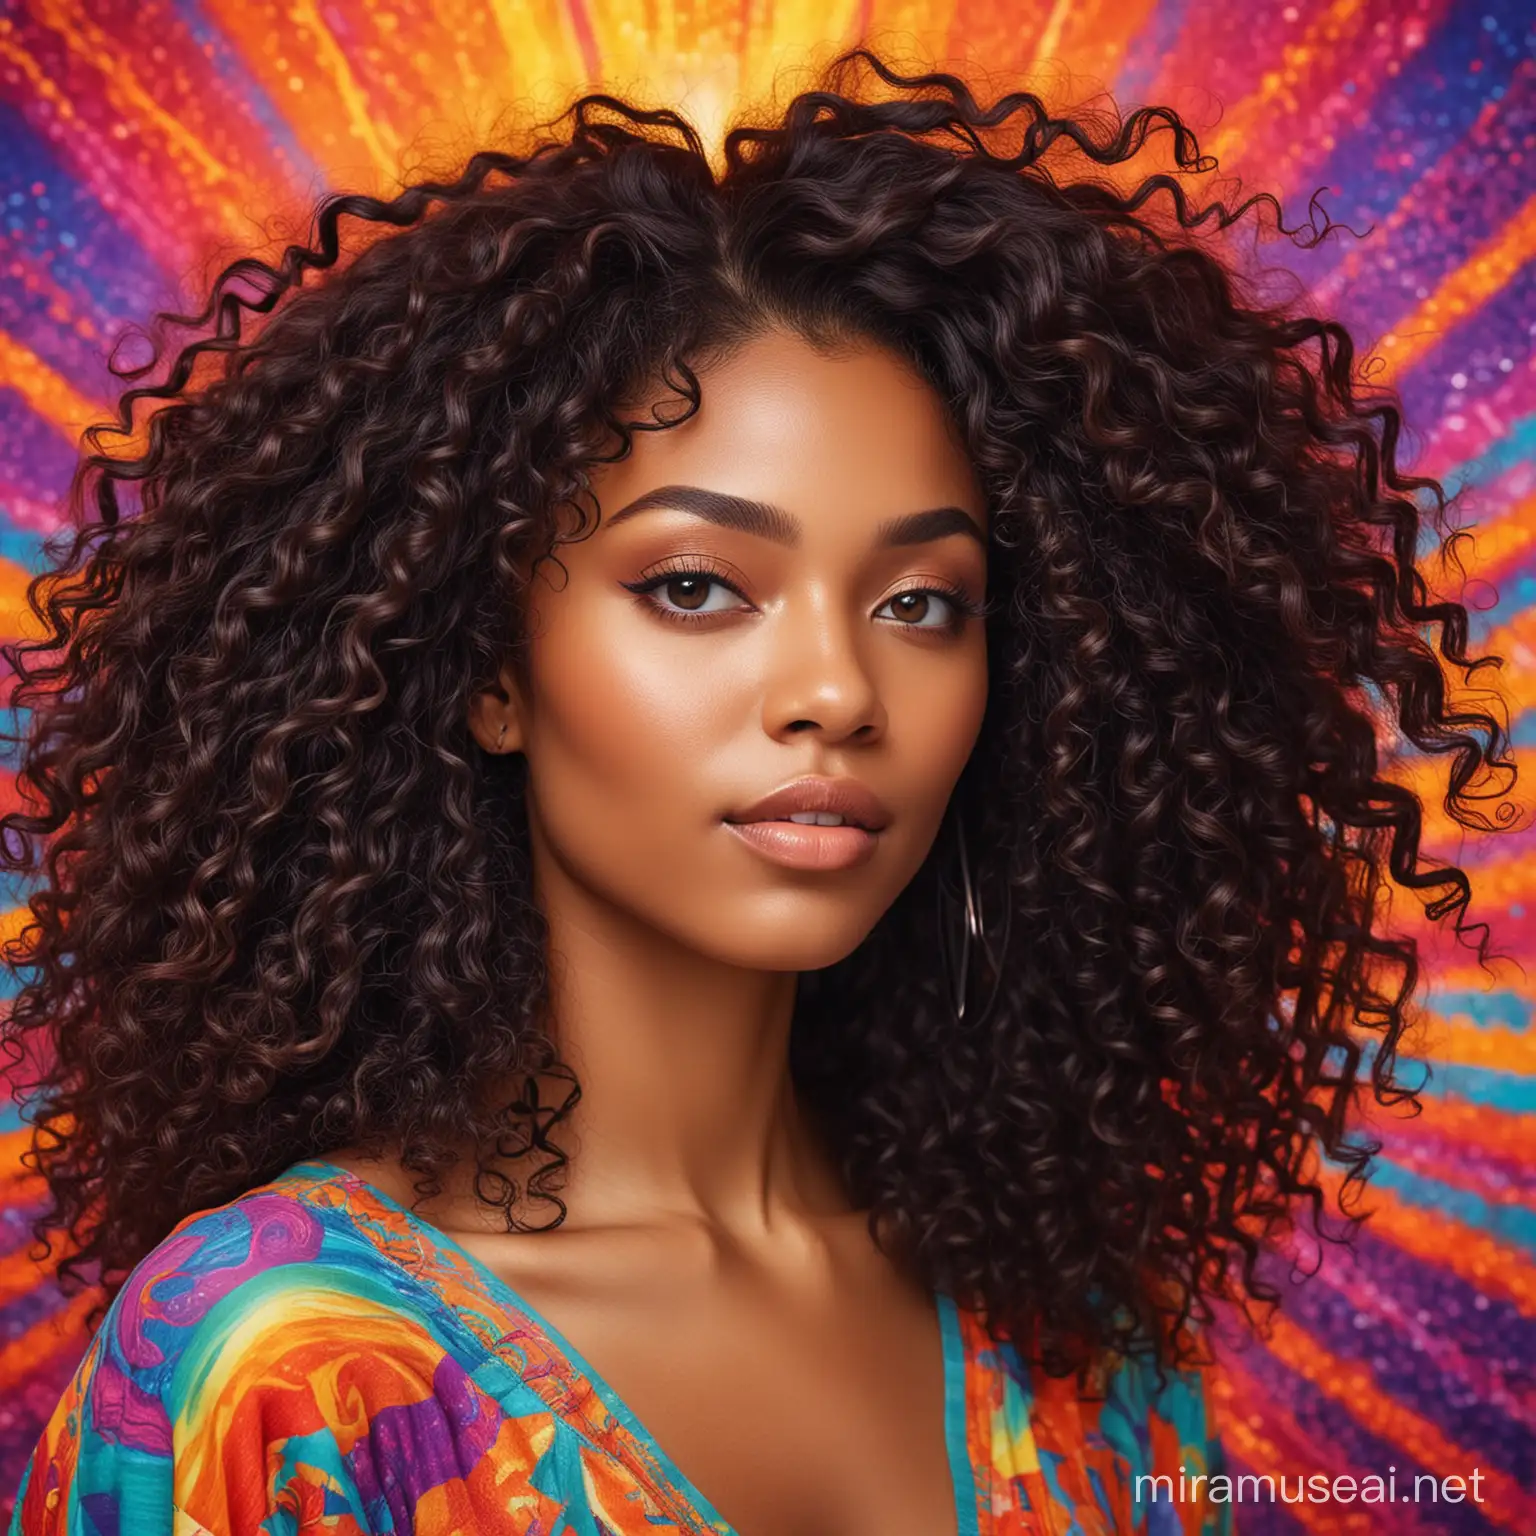 beautiful black woman with curly long hair in a psychedelic colorful background